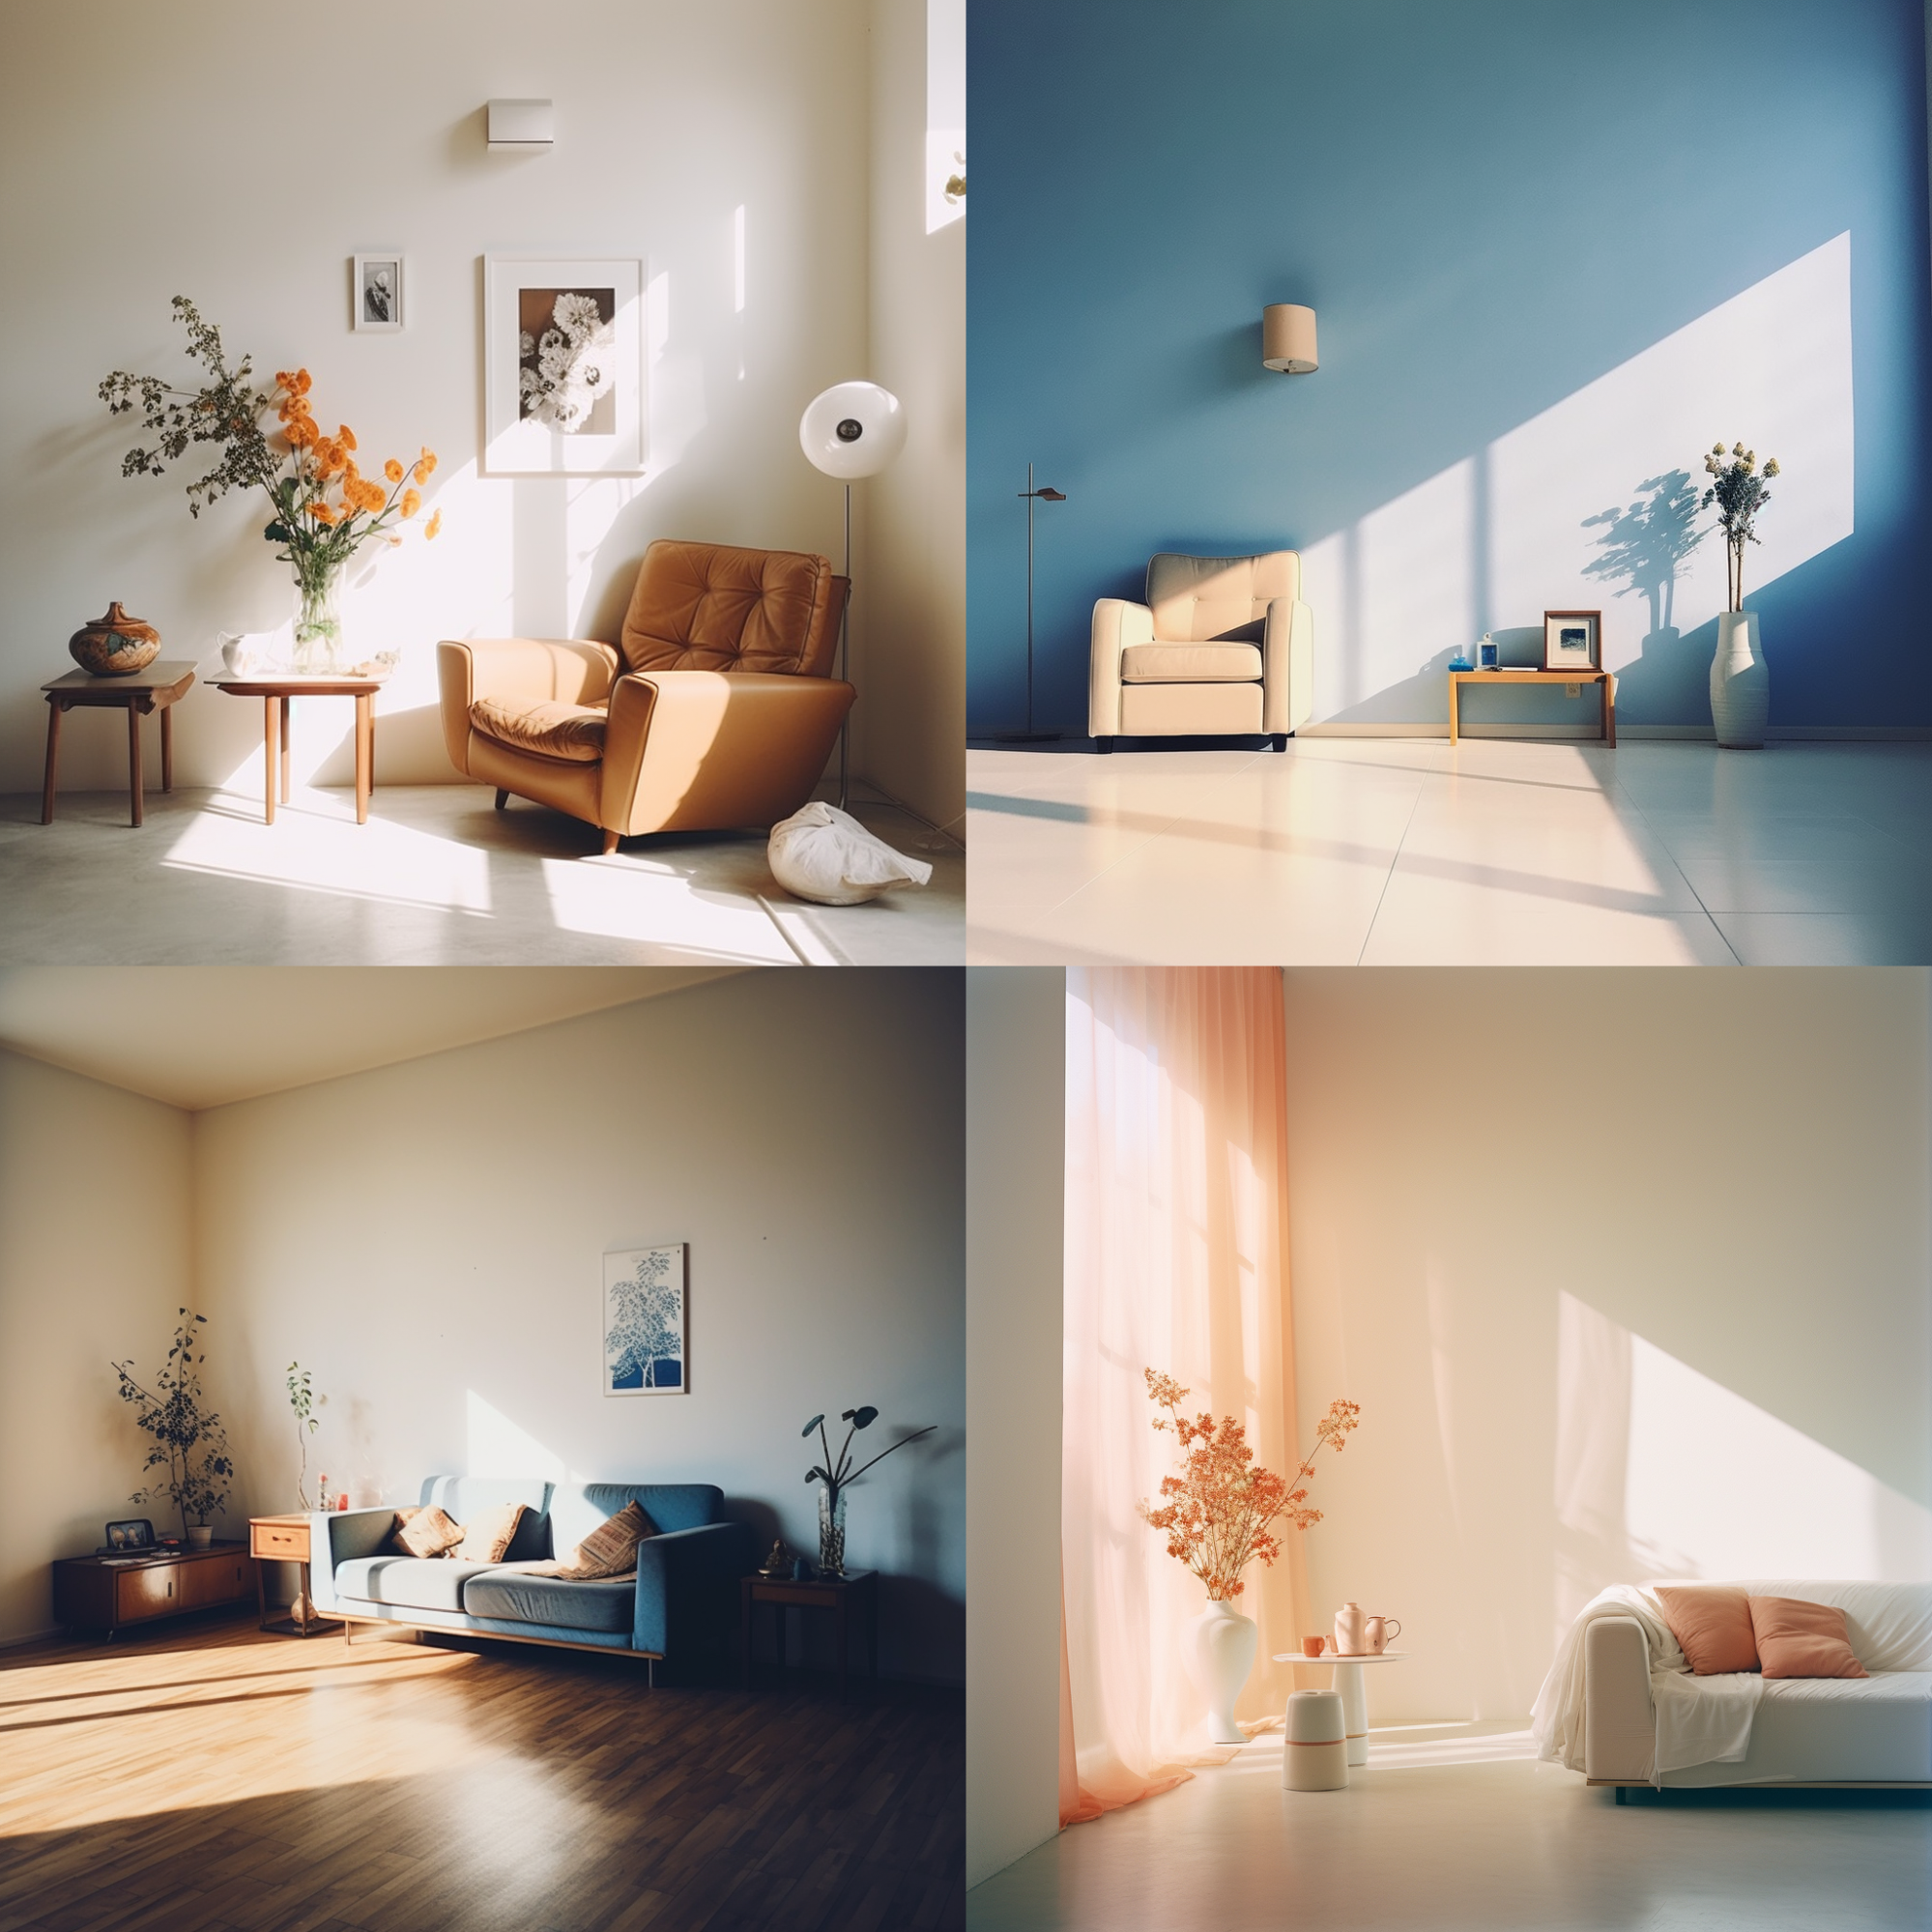 Four image options generated by Midjourney based on a home decor inspiration prompt